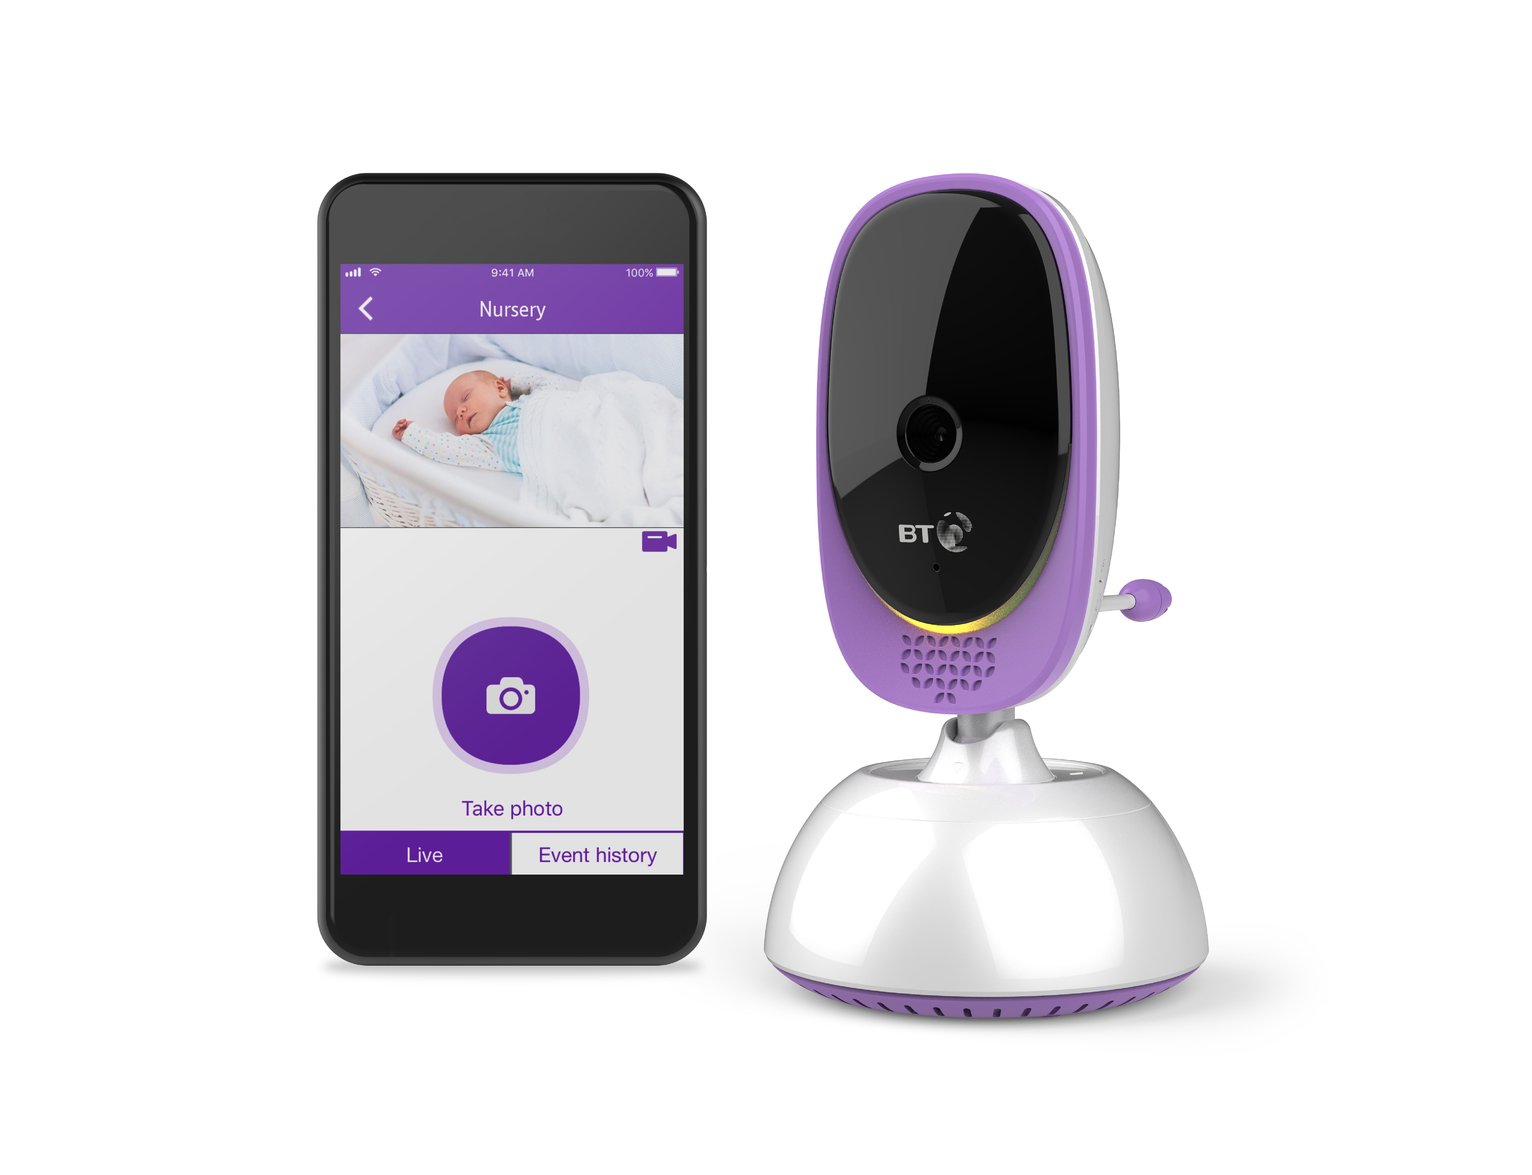 BT Smart Video 5800 Baby Monitor Review